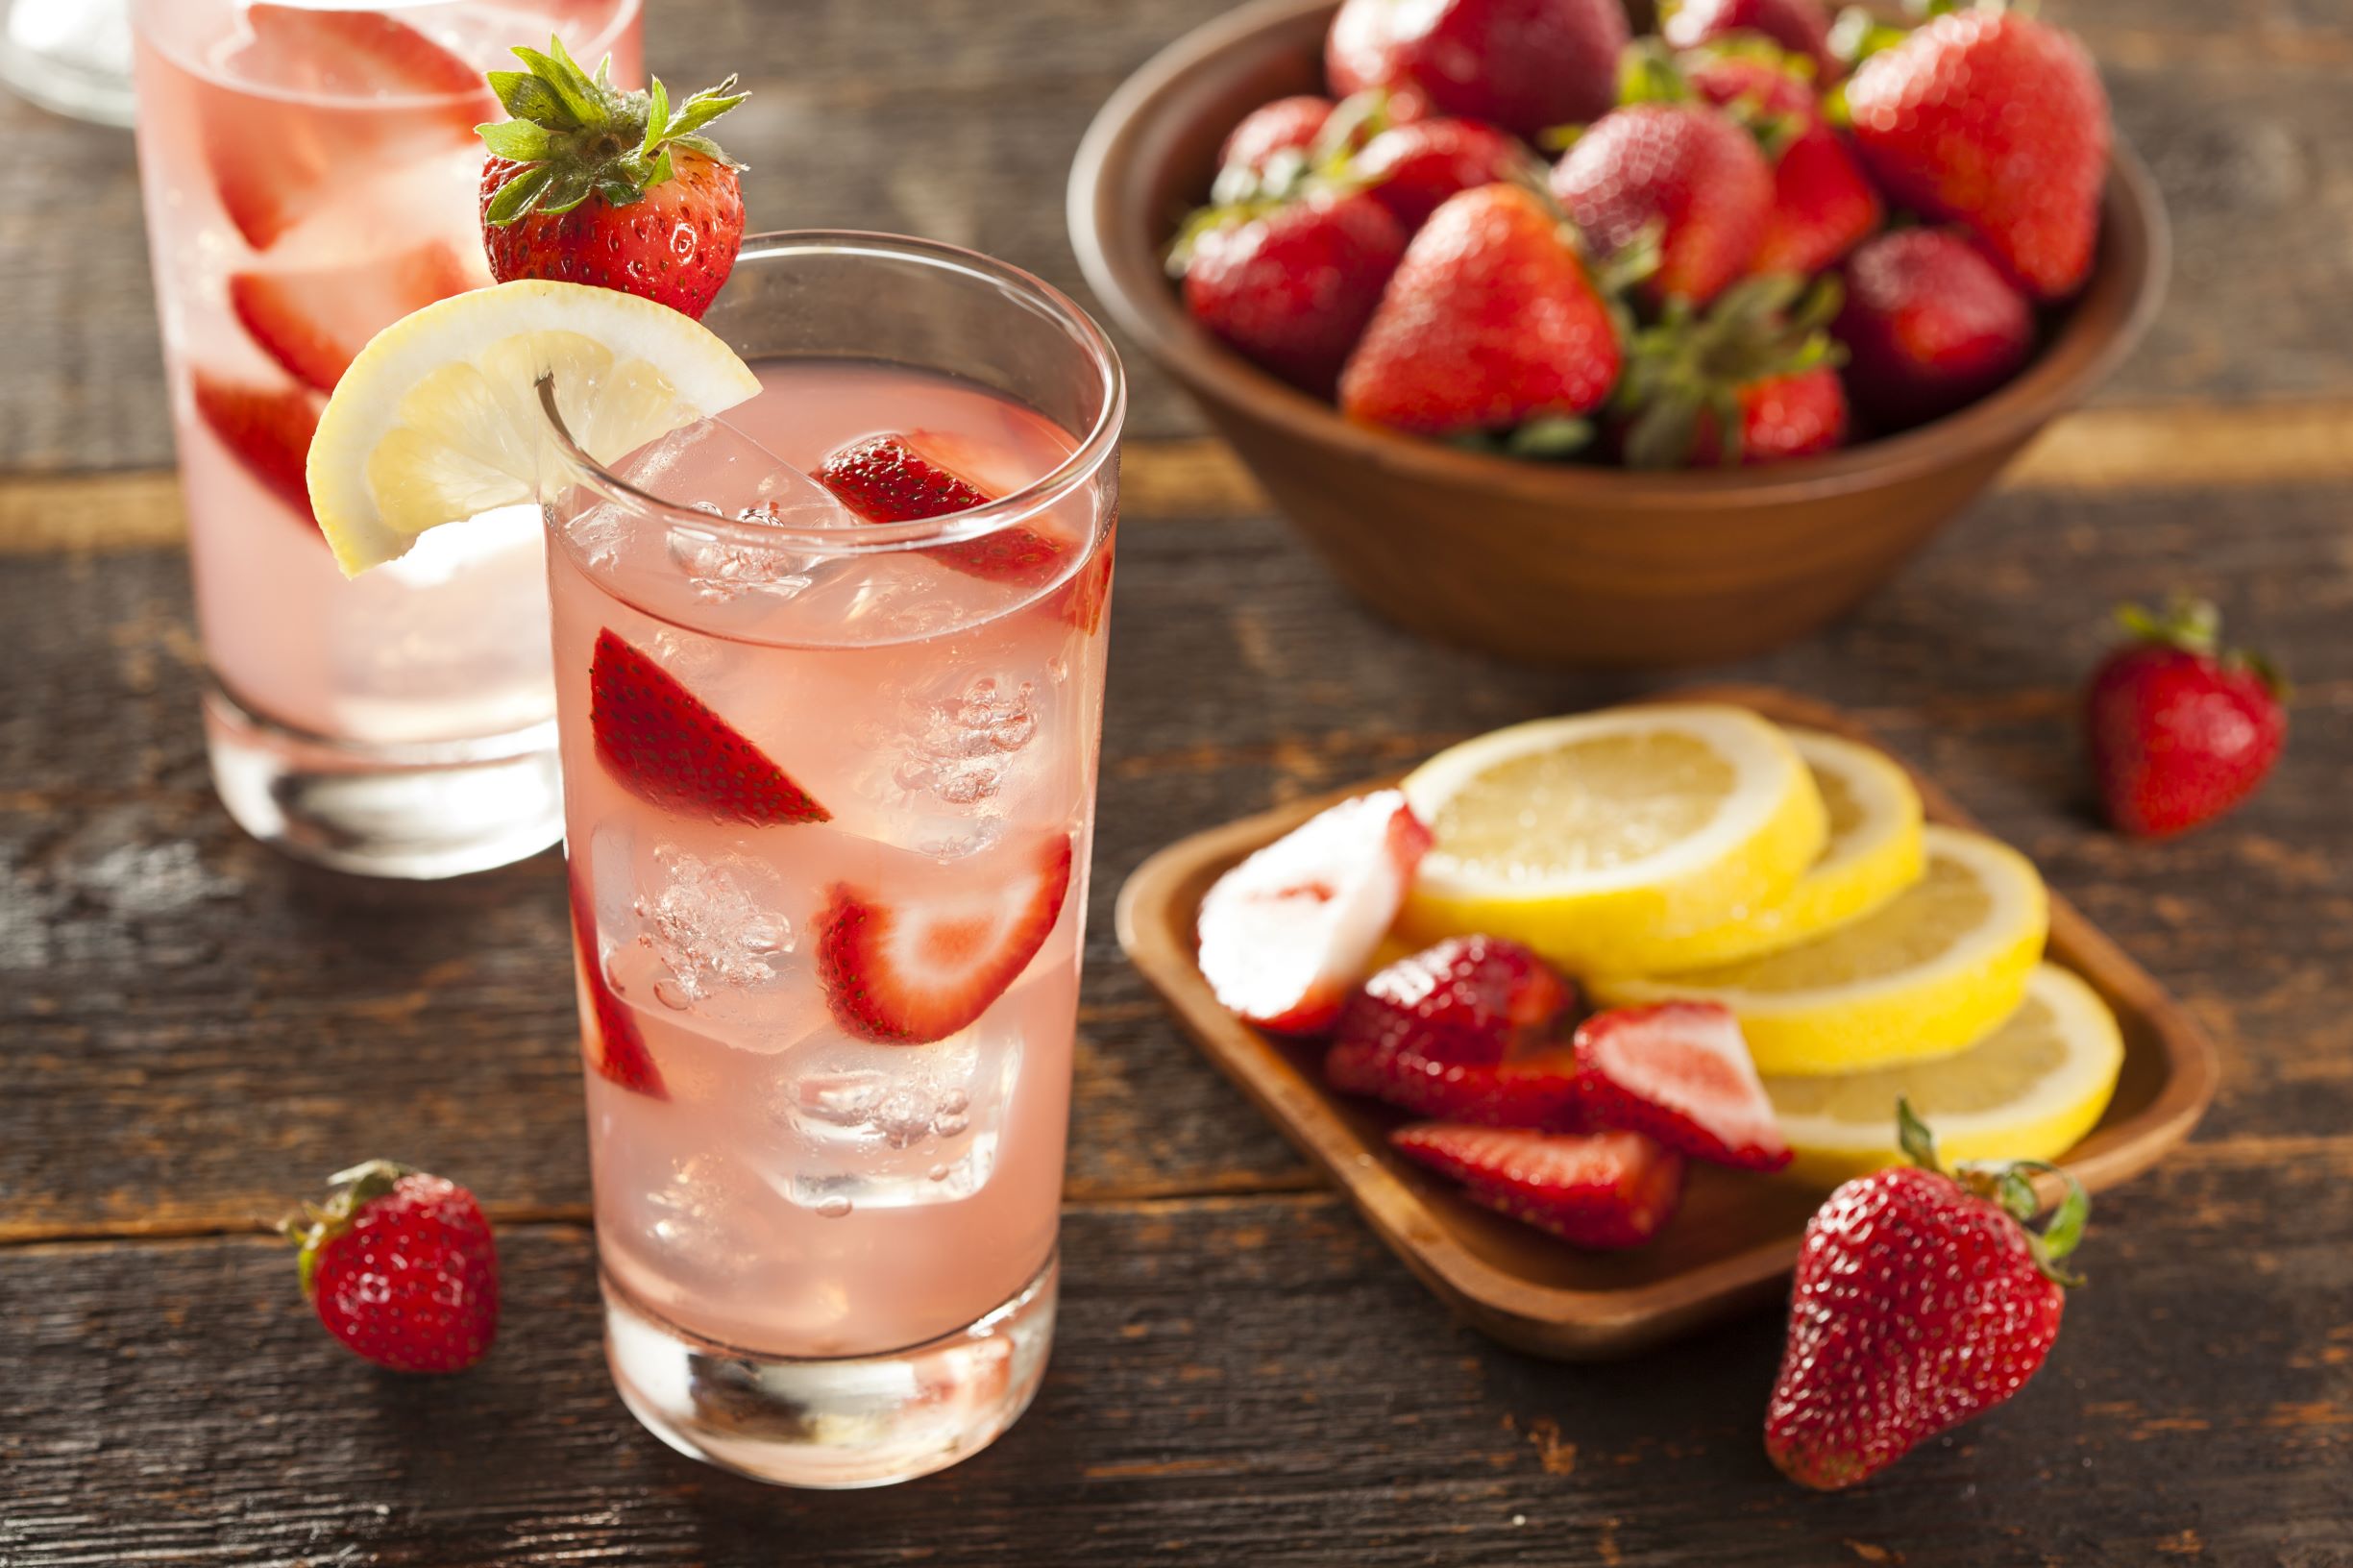 Strawberry Lemonades with strawberry and lemon garnishes and a bowl of strawberries and lemon slices